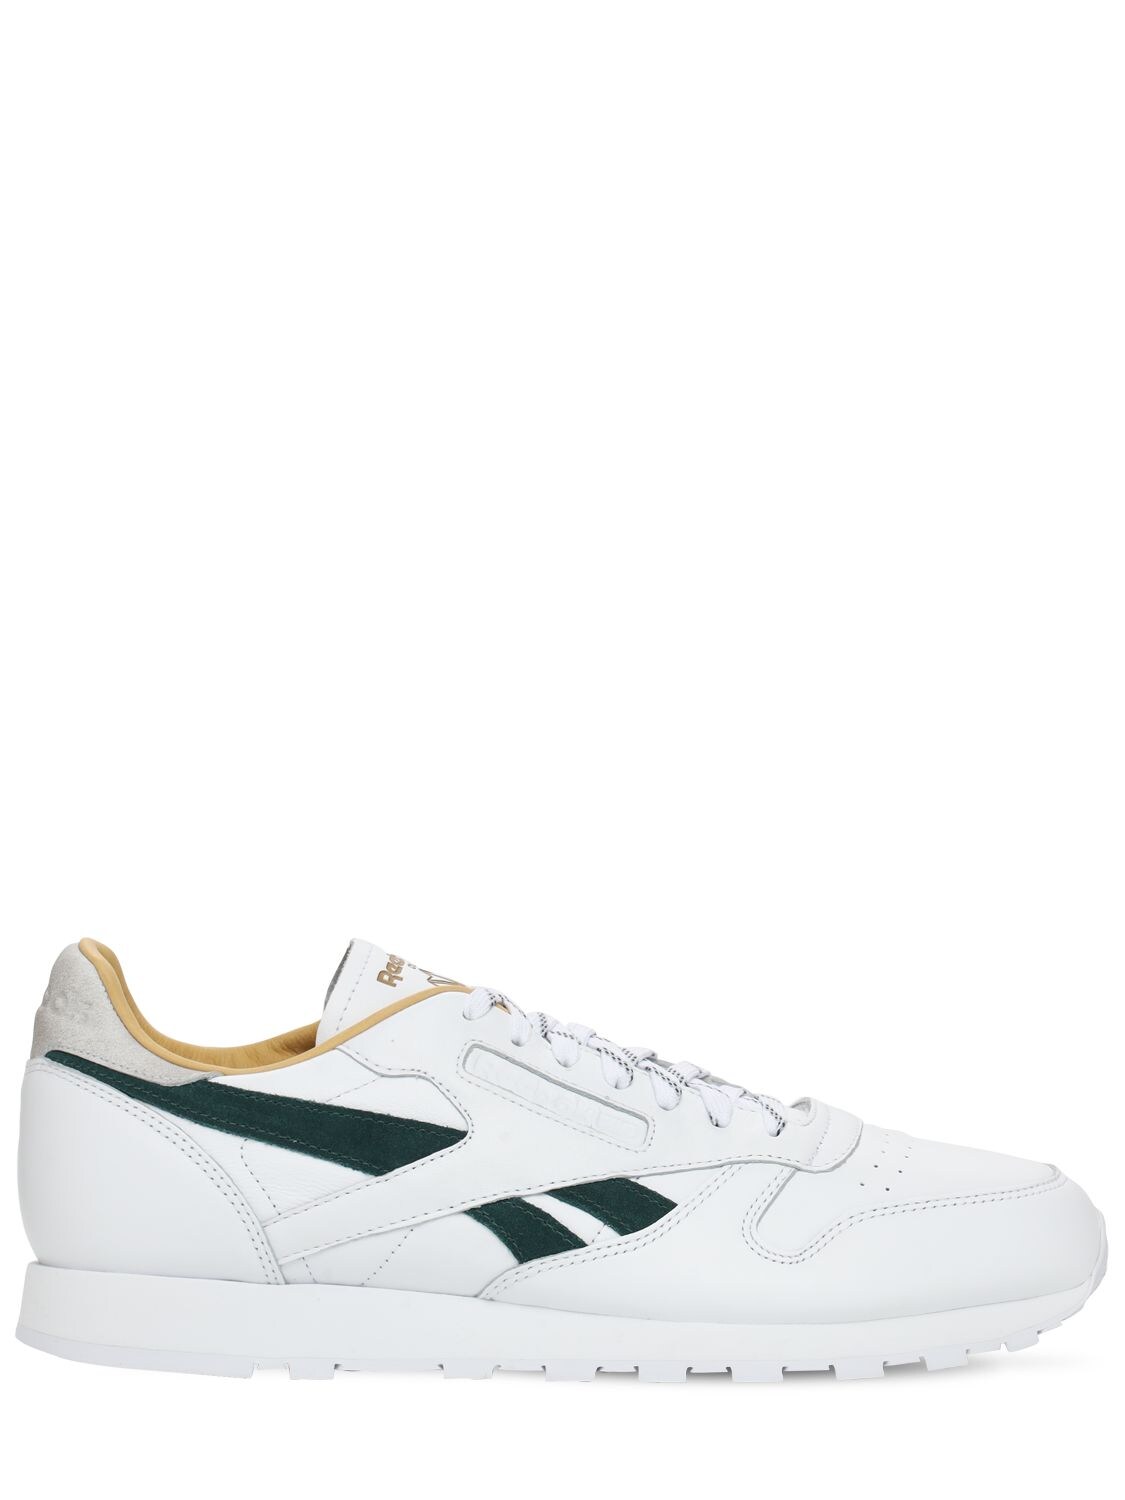 Reebok White Classic Low Top Leather Sneakers